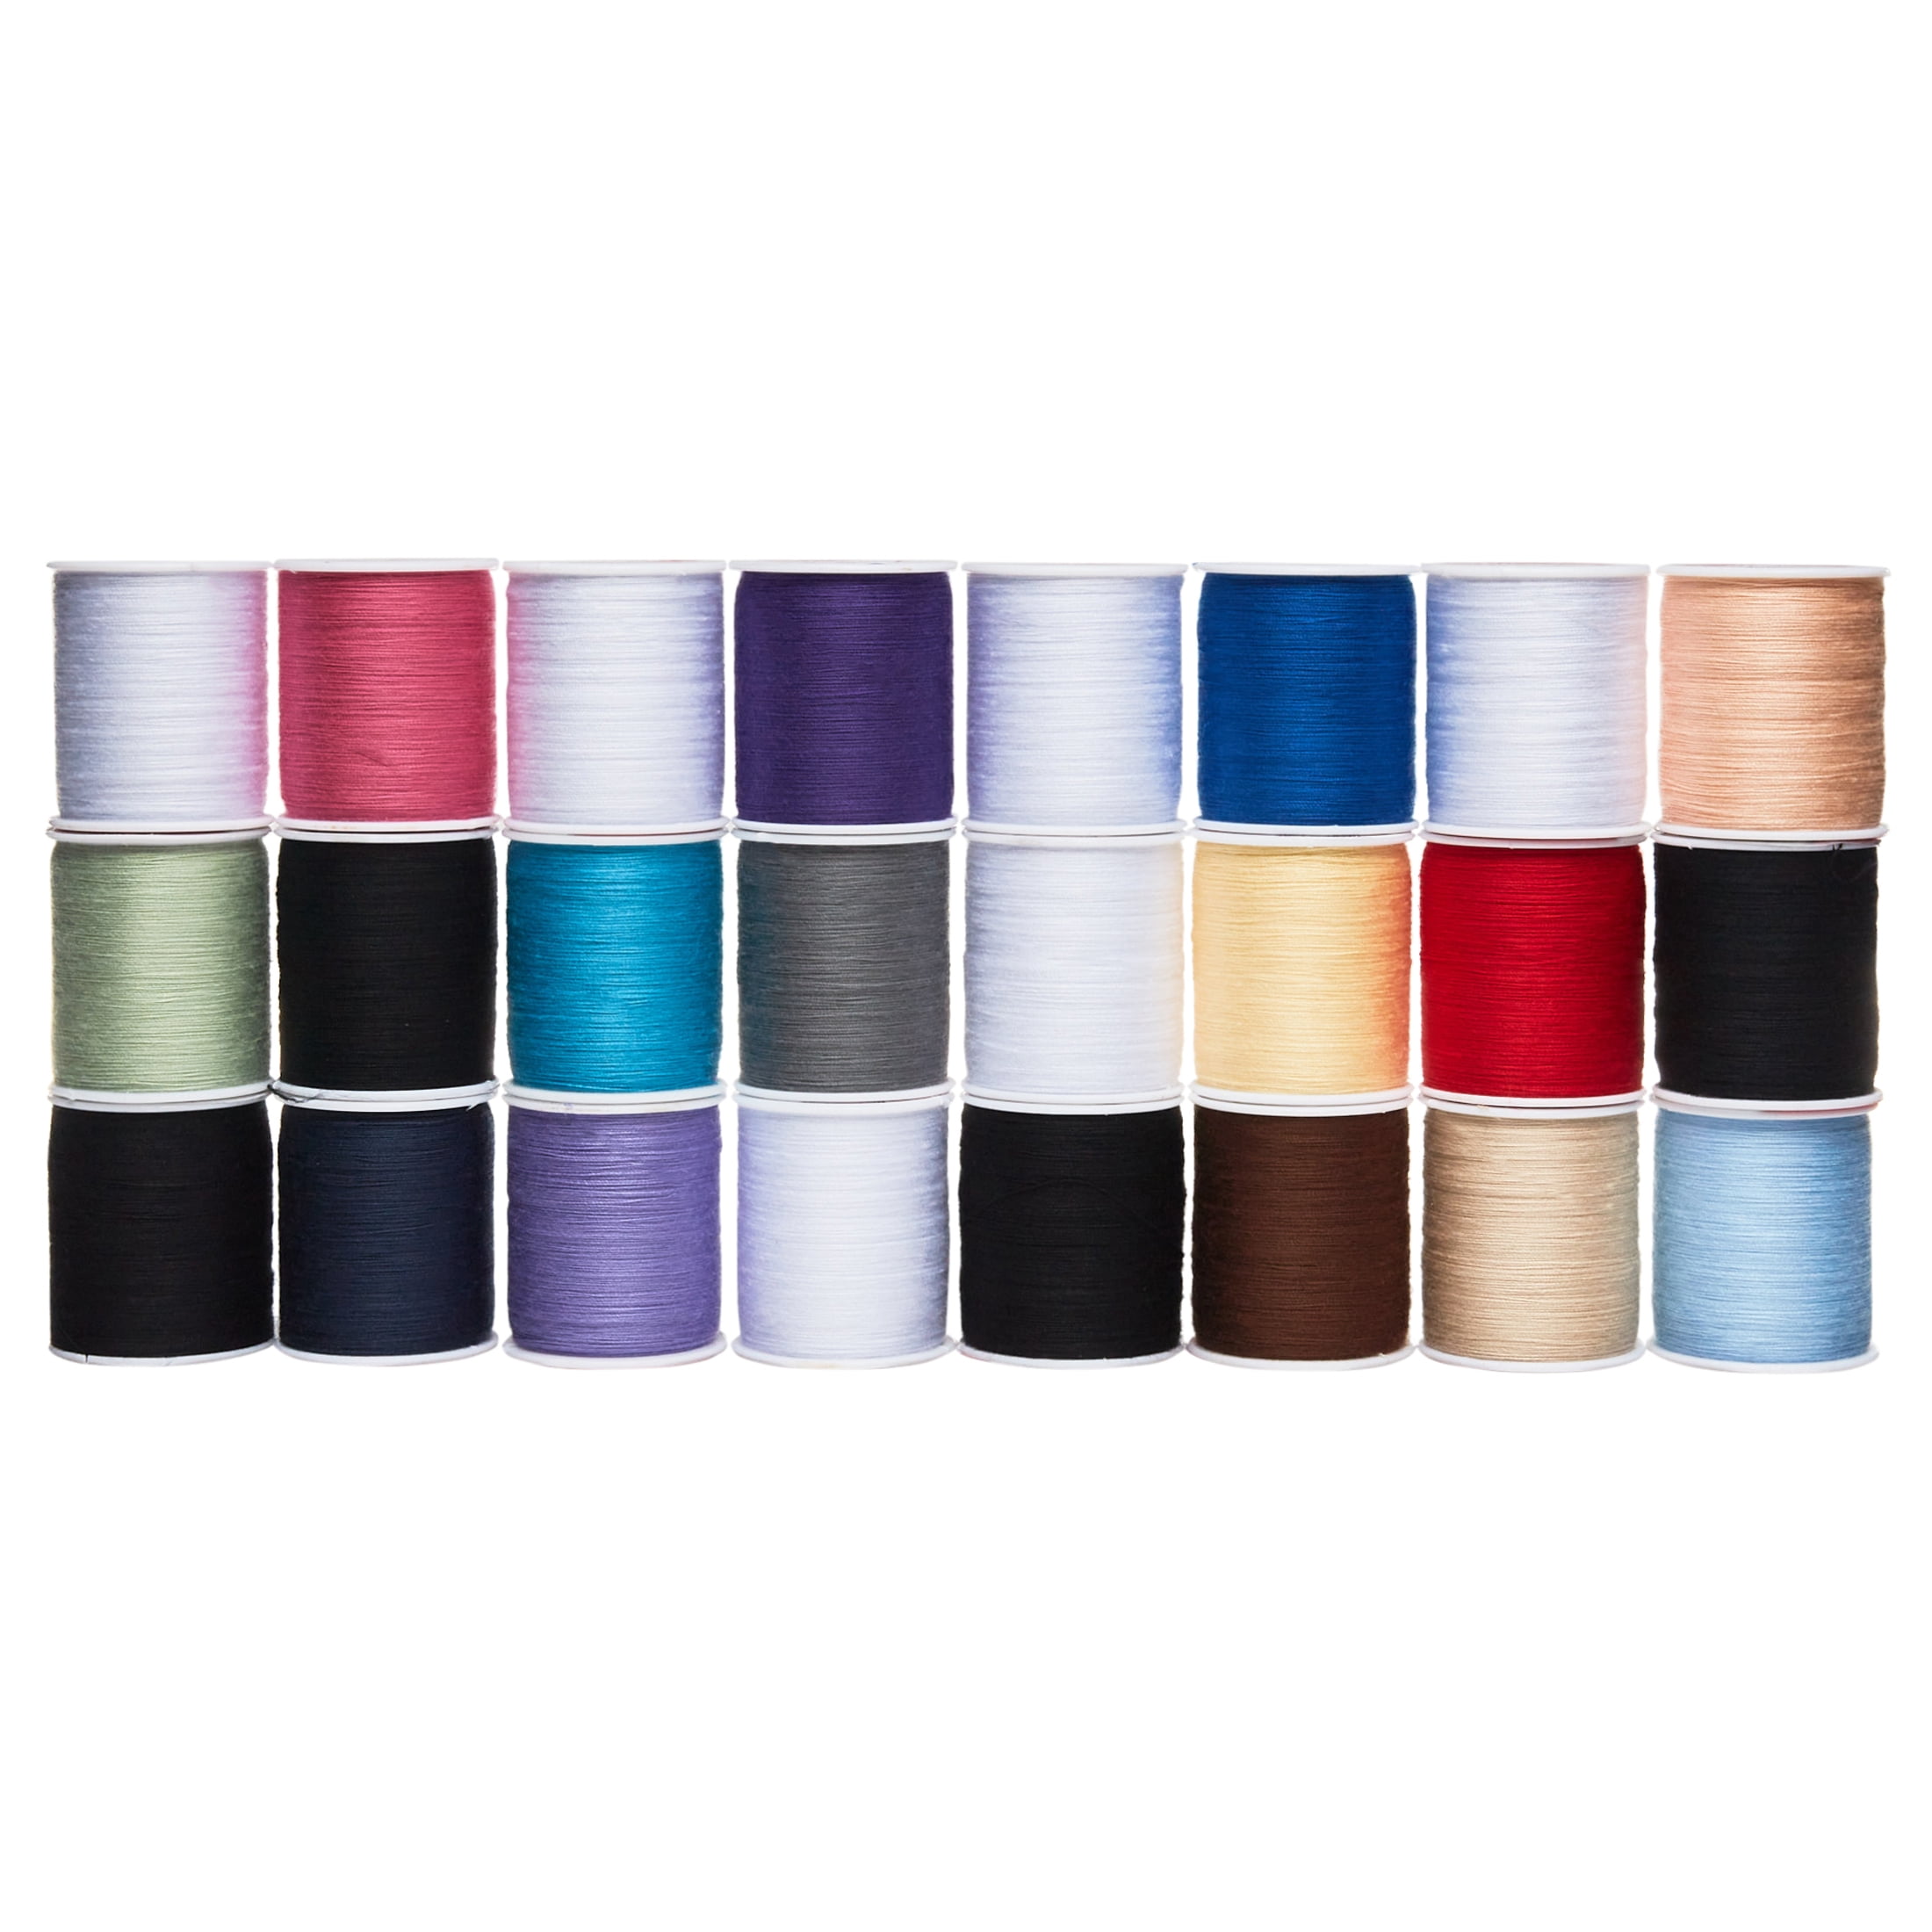 All Purpose Polyester Thread - Browns, Oranges & Yellows, Hobby Lobby, 1256148